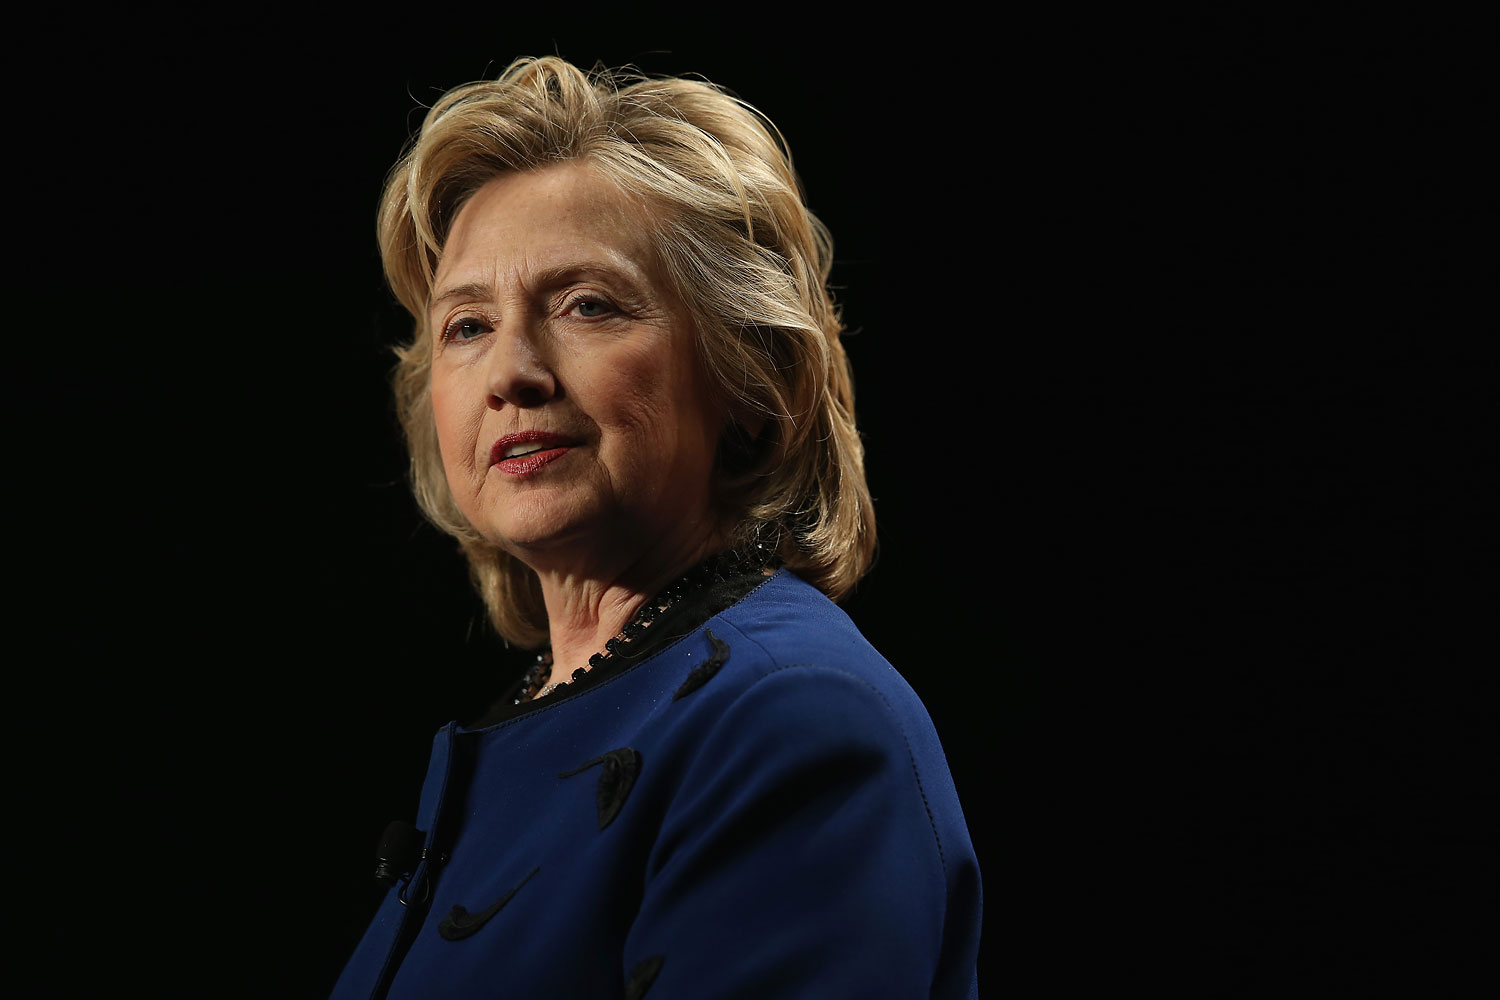 Hillary Clinton at the University of Miami on Feb. 26, 2014. (Joe Raedle—Getty Images)